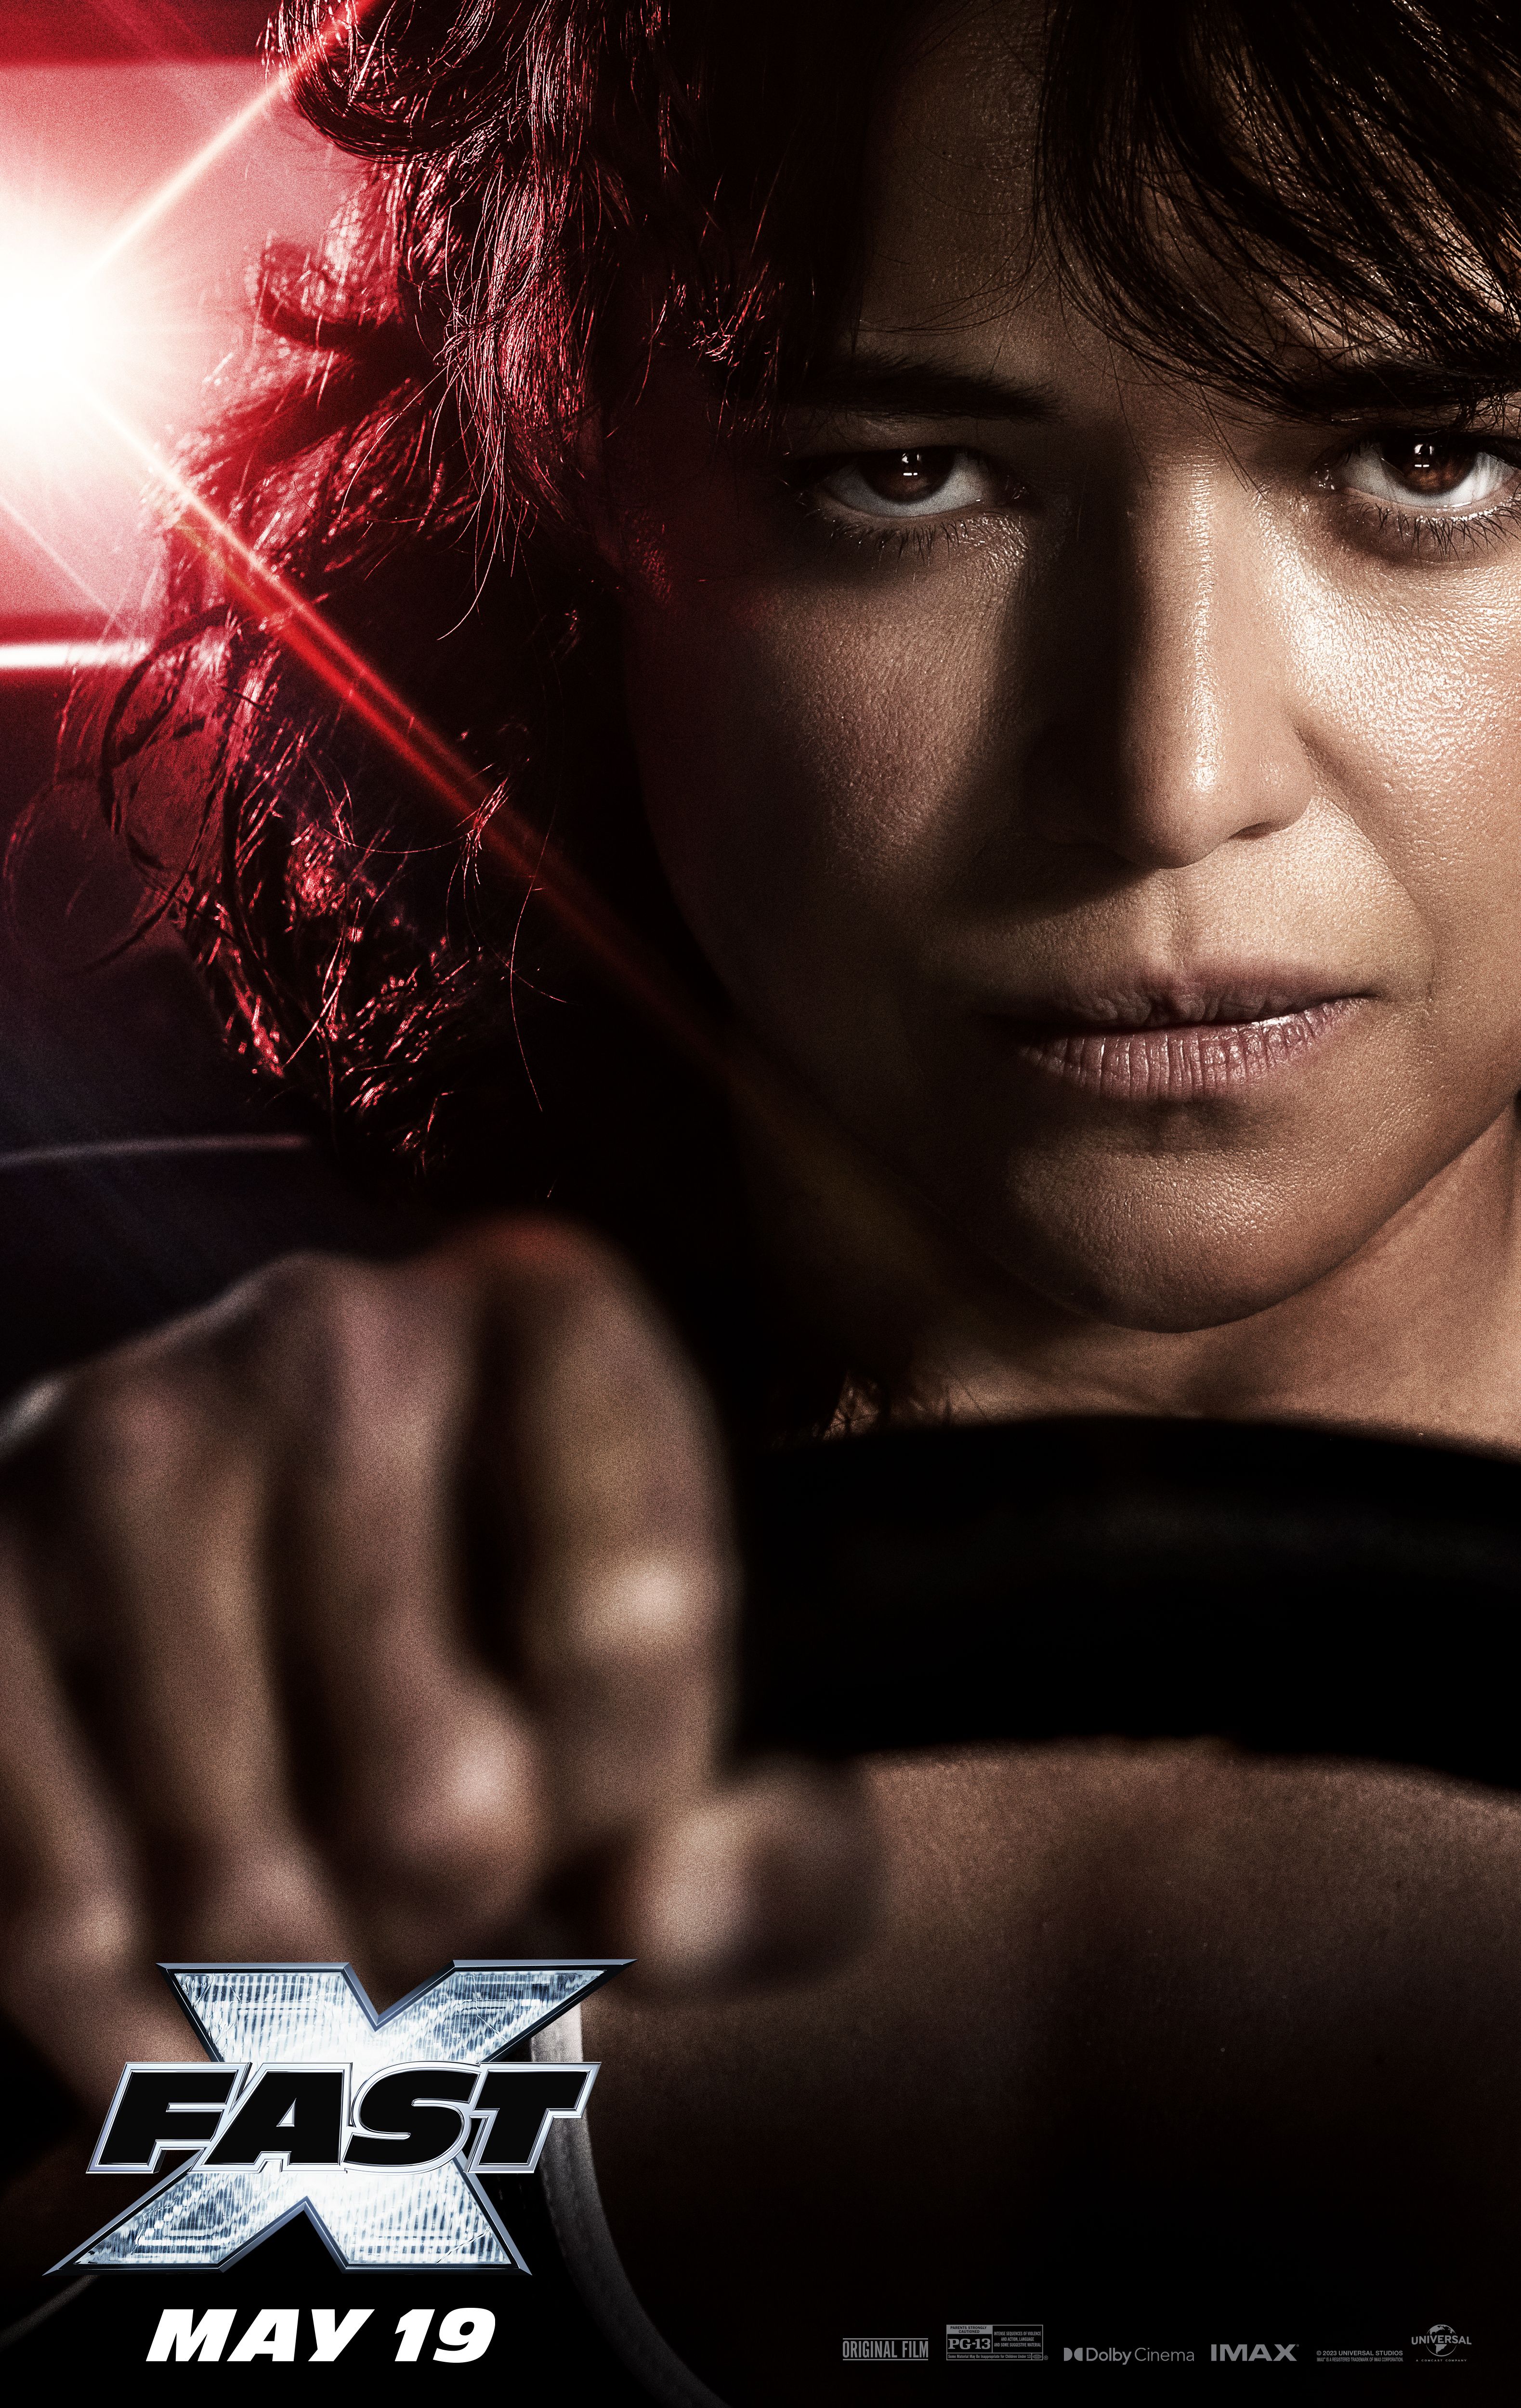 fast-x-chatacter-poster-michelle-rodriguez